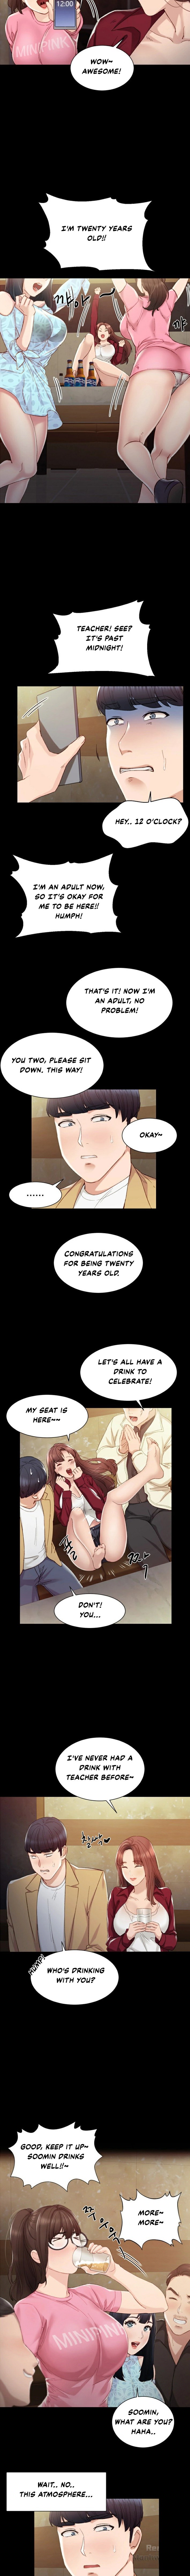 Teacher Training Chapter 2 - Page 9